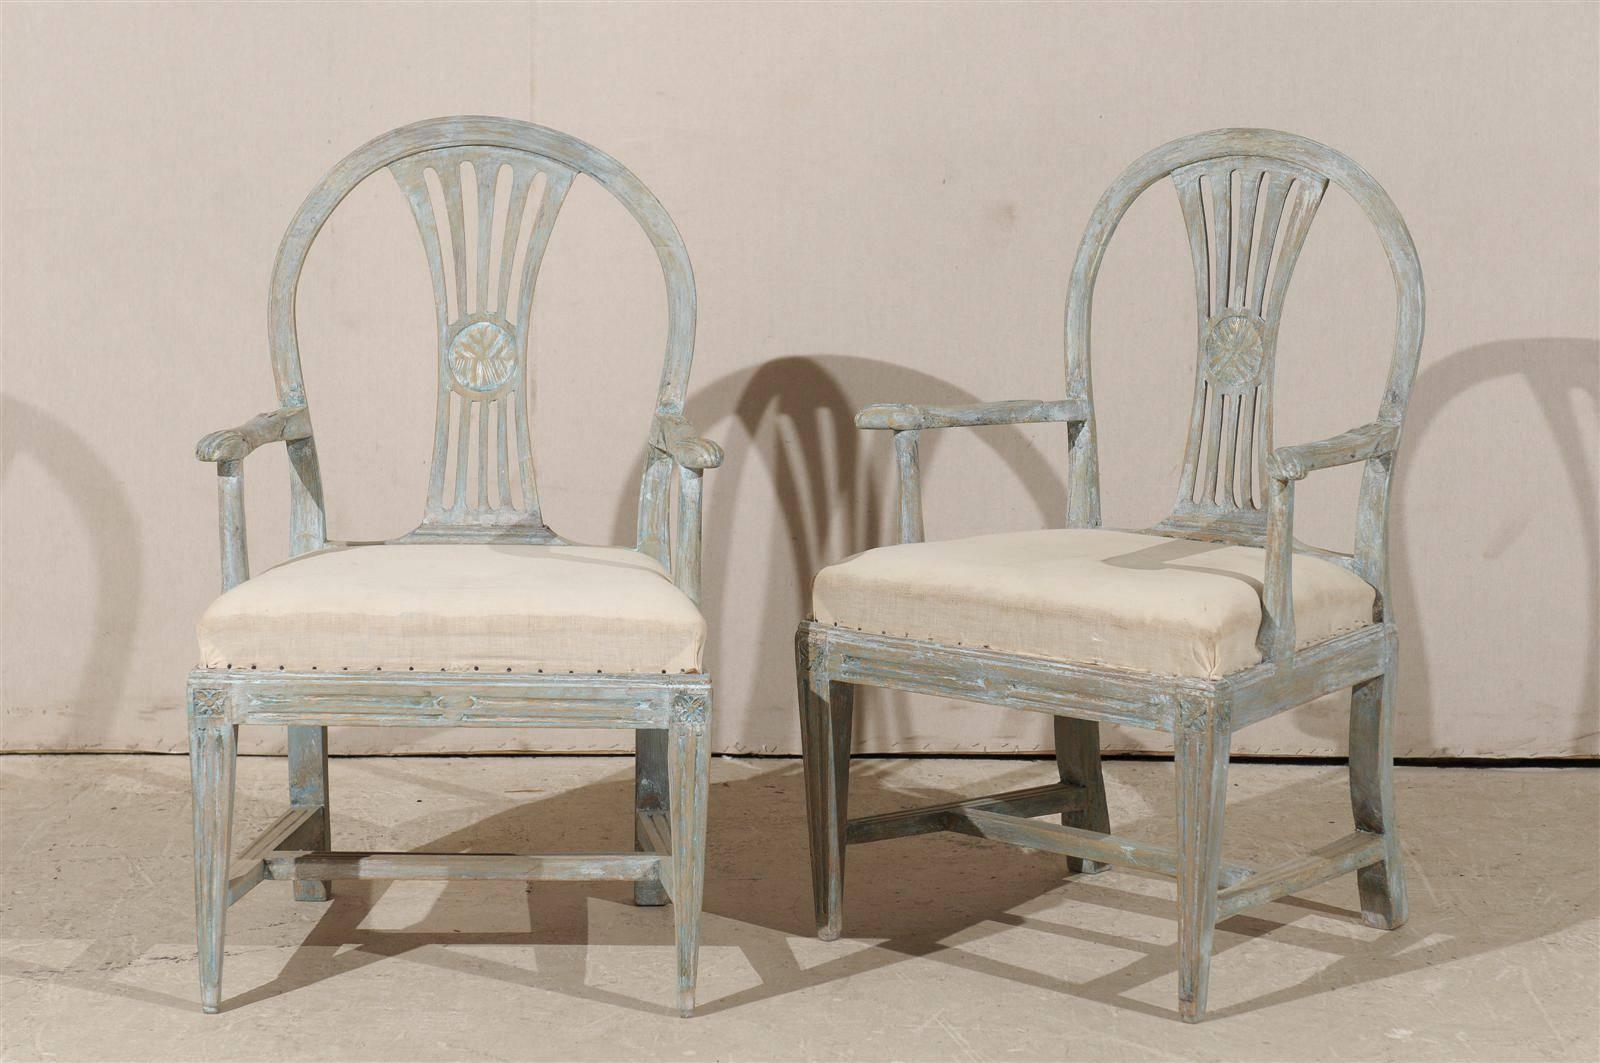 A pair of early 19th century period Gustavian Swedish armchairs. This exquisite pair of painted wood chairs features pierced splats, carved knuckles, rosettes on the knees sitting above tapered front legs and cross stretcher. These chairs are ready